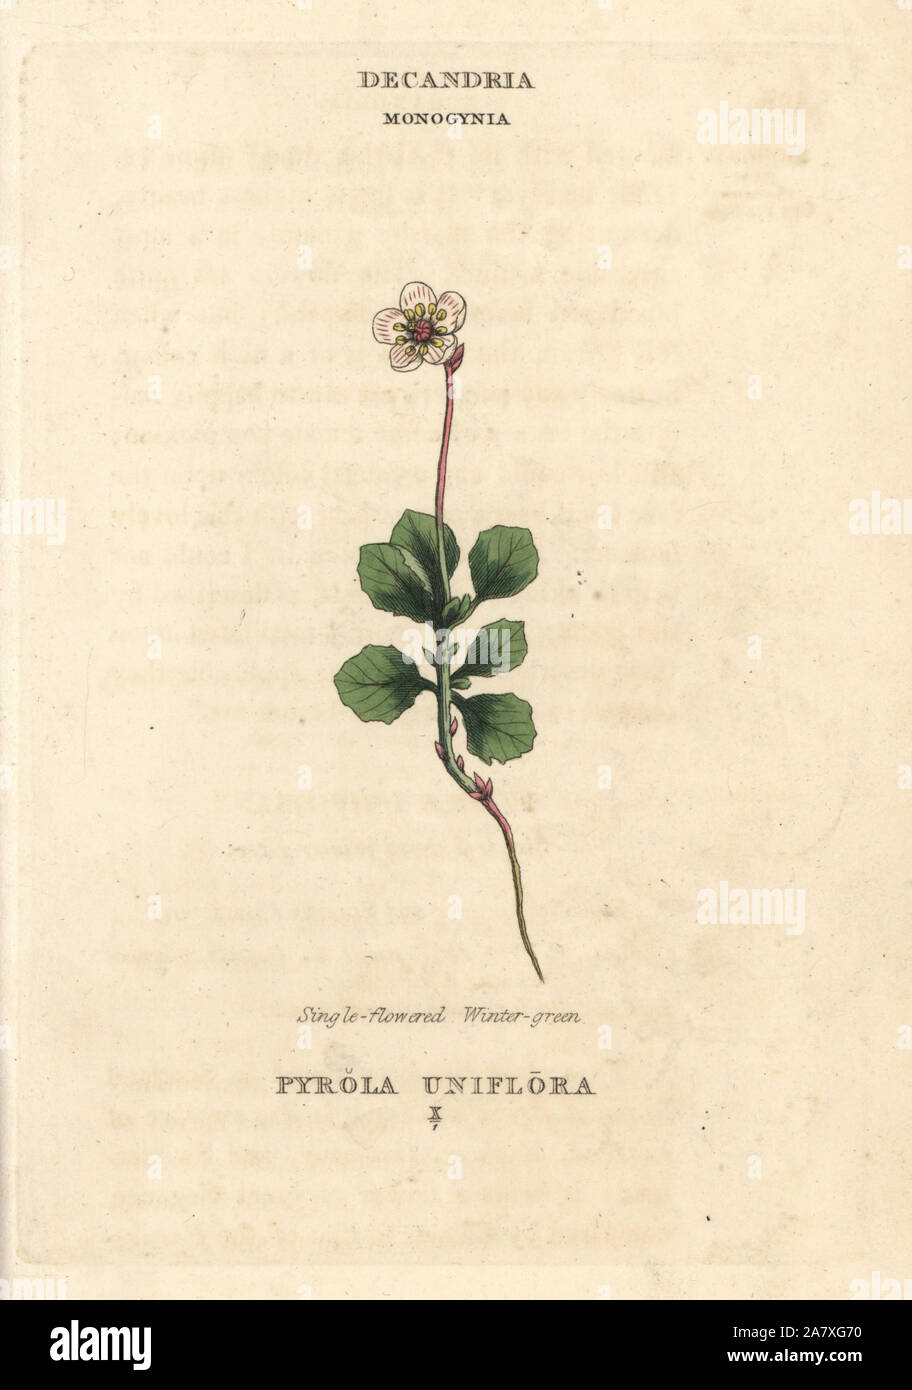 Single-flowered wintergreen, Moneses uniflora (Pyrola uniflora). Handcoloured copperplate engraving after an illustration by Richard Duppa from his The Classes and Orders of the Linnaean System of Botany, Longman, Hurst, London, 1816. Stock Photo